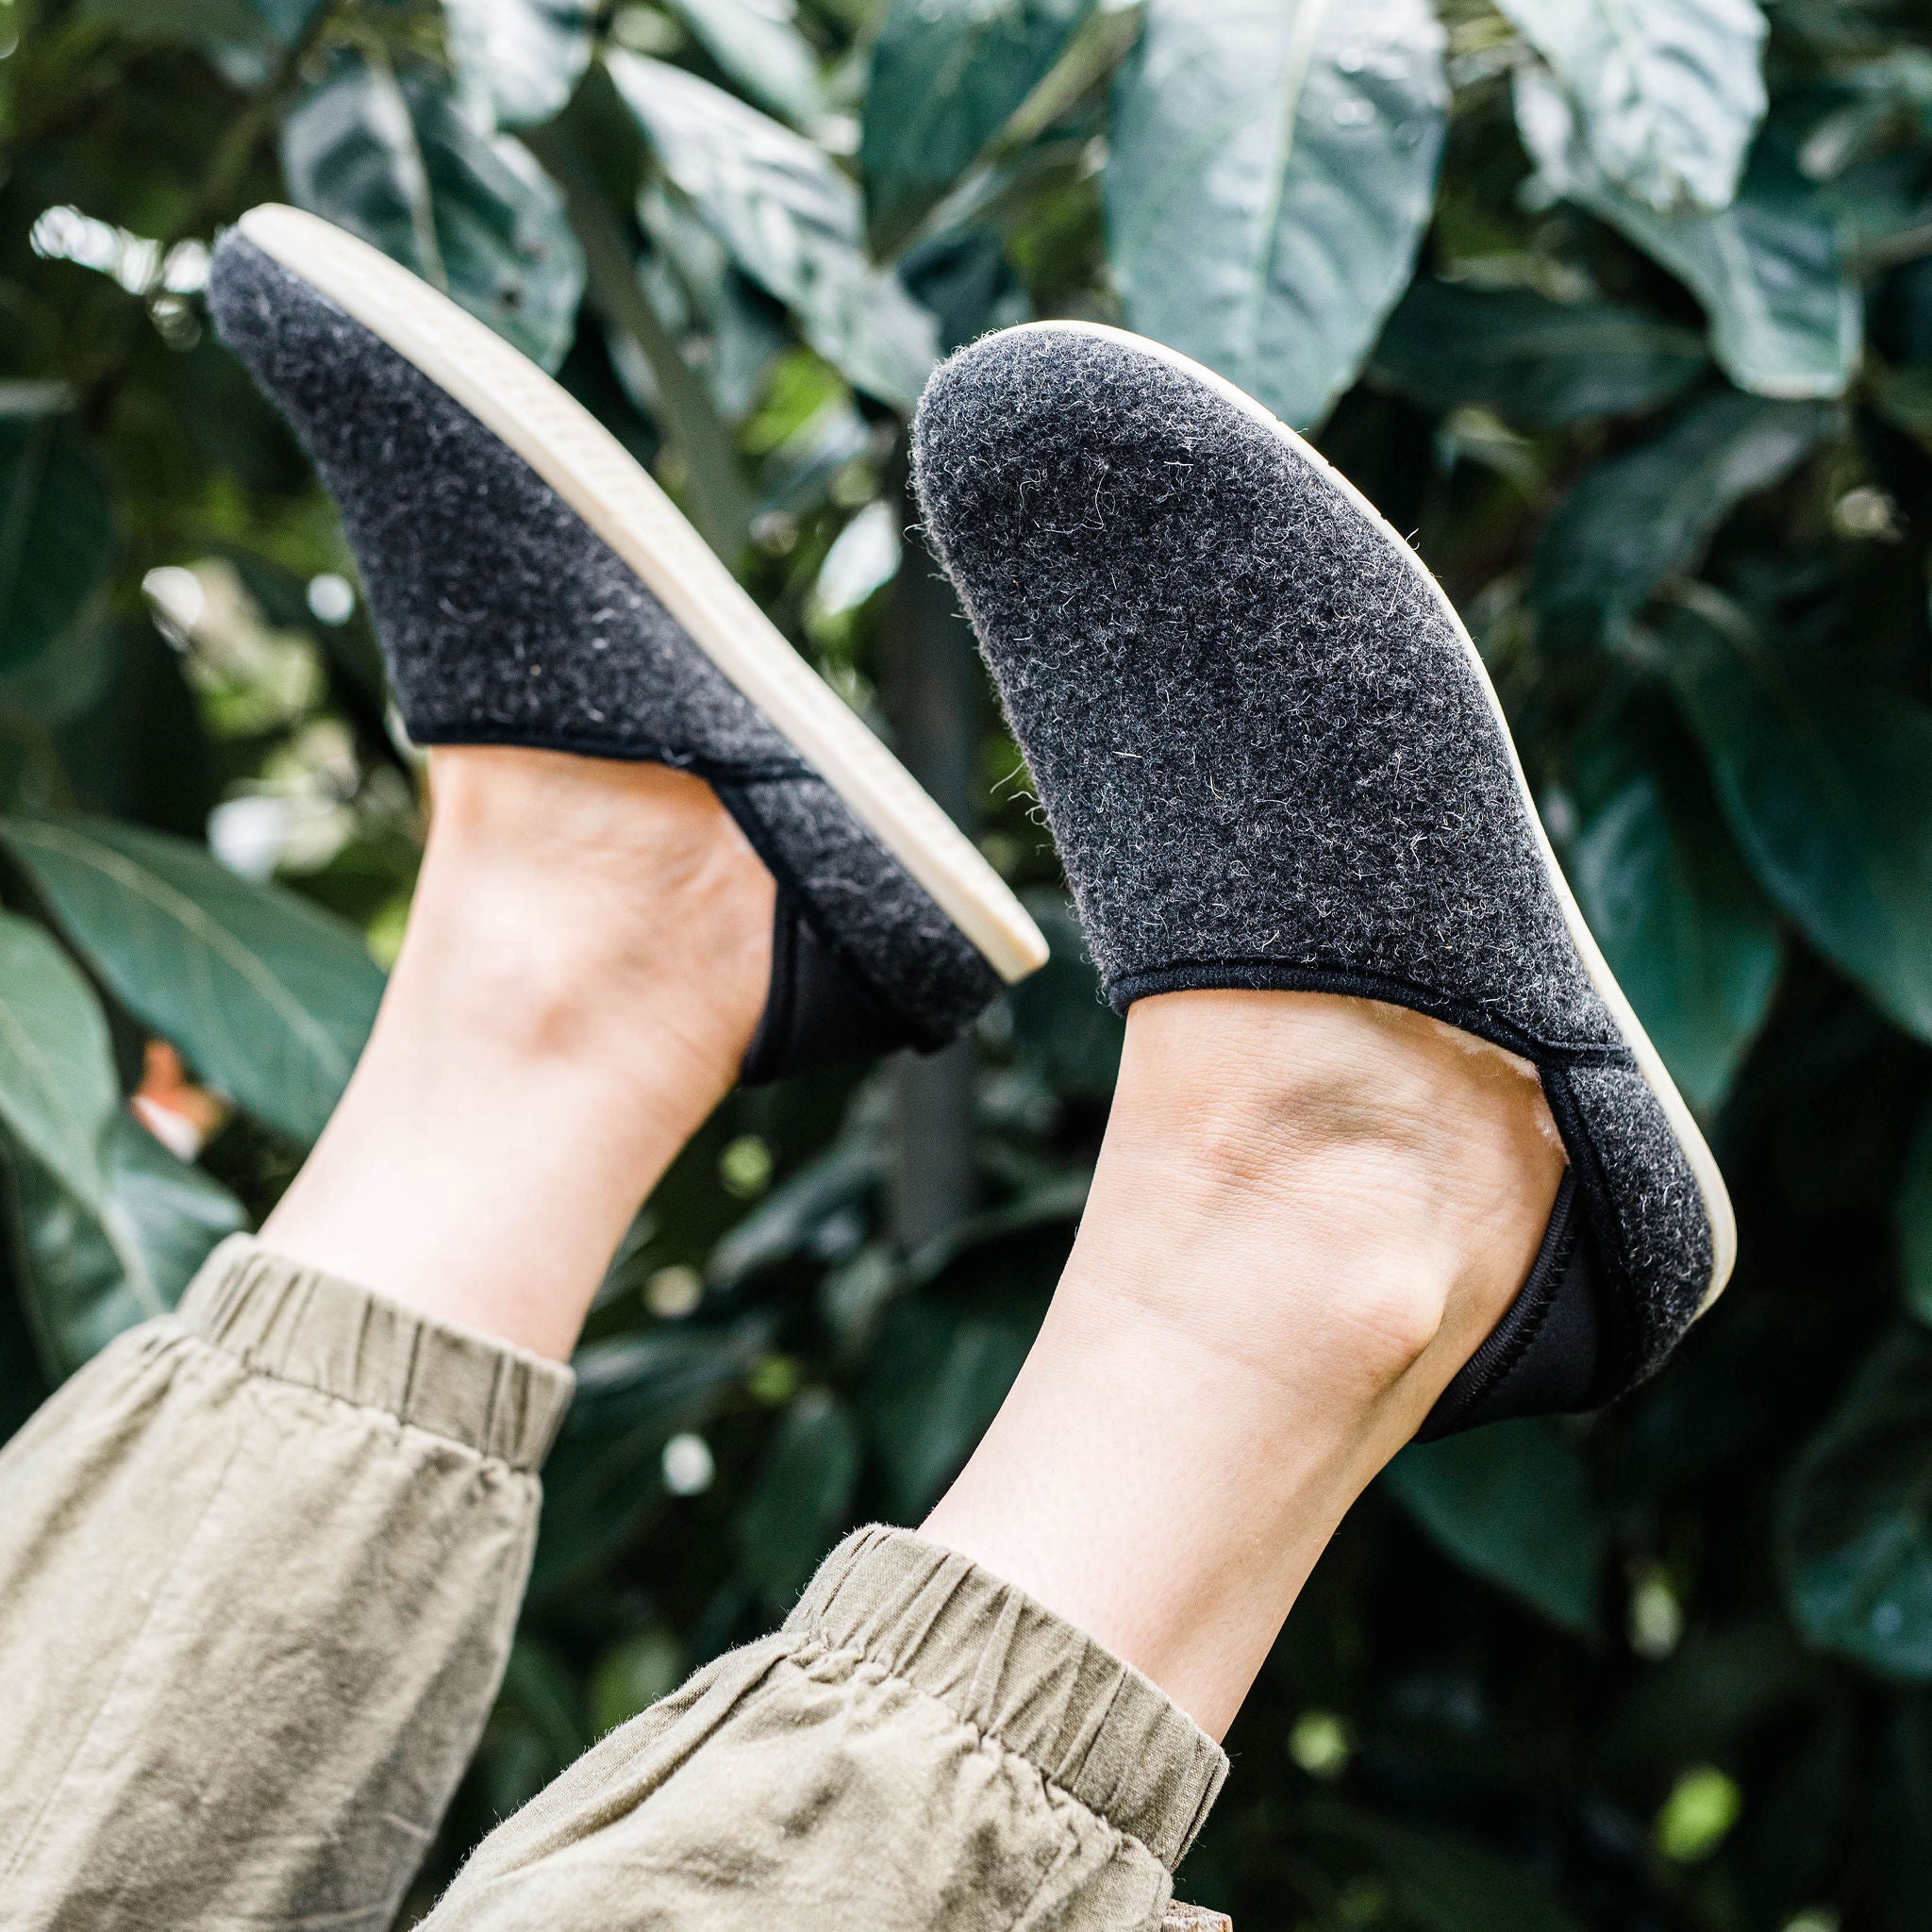 A slipper that’s kind to nature and your feet.